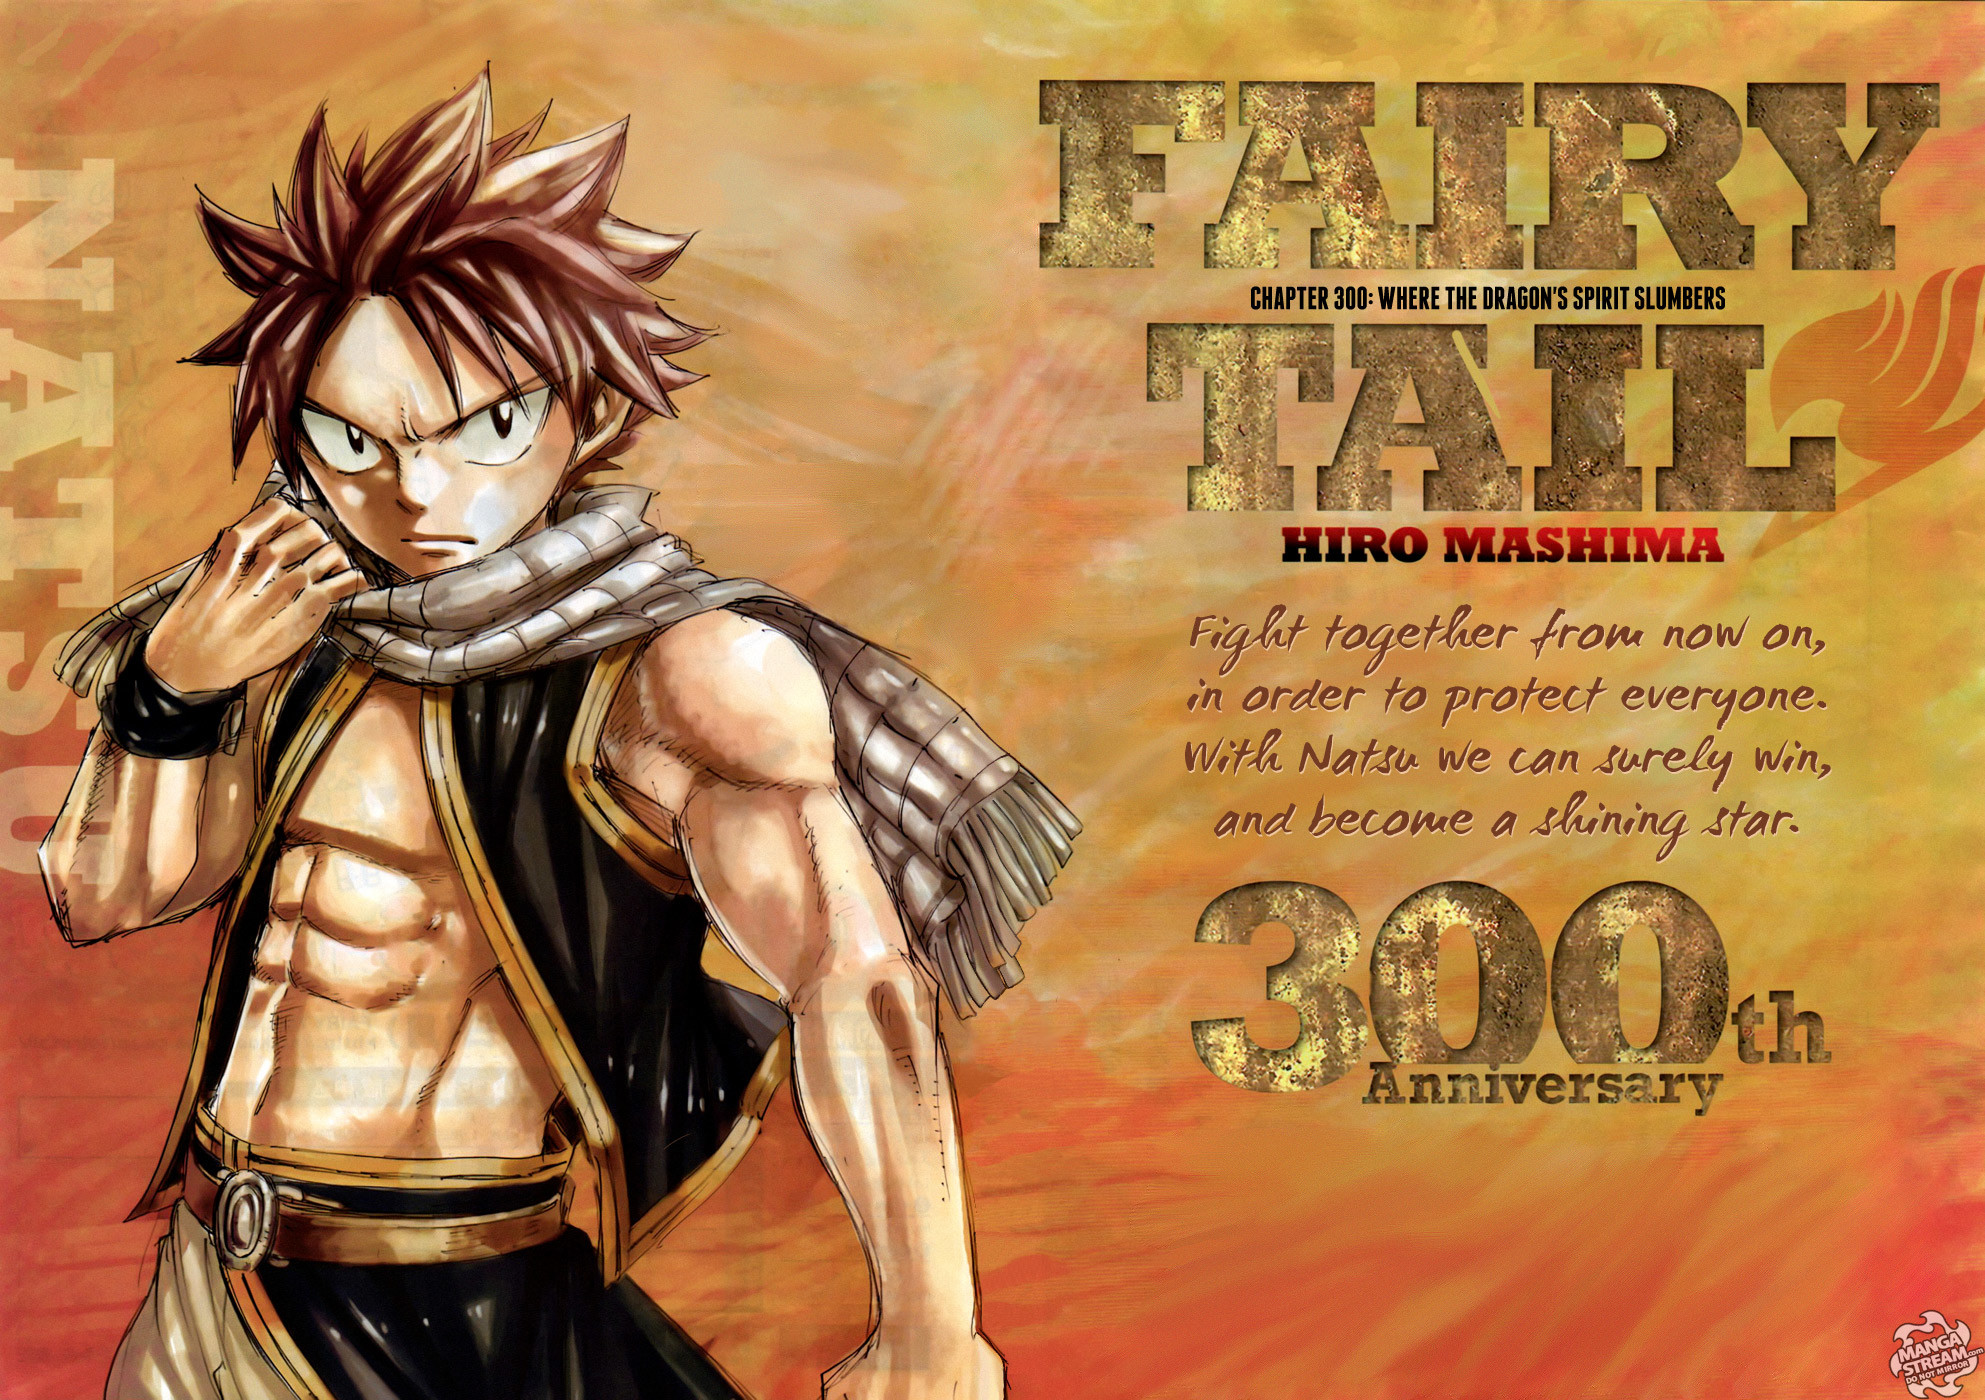 1985x1400 Fairy Tail Natsu Wallpapers Picture As Wallpaper HD